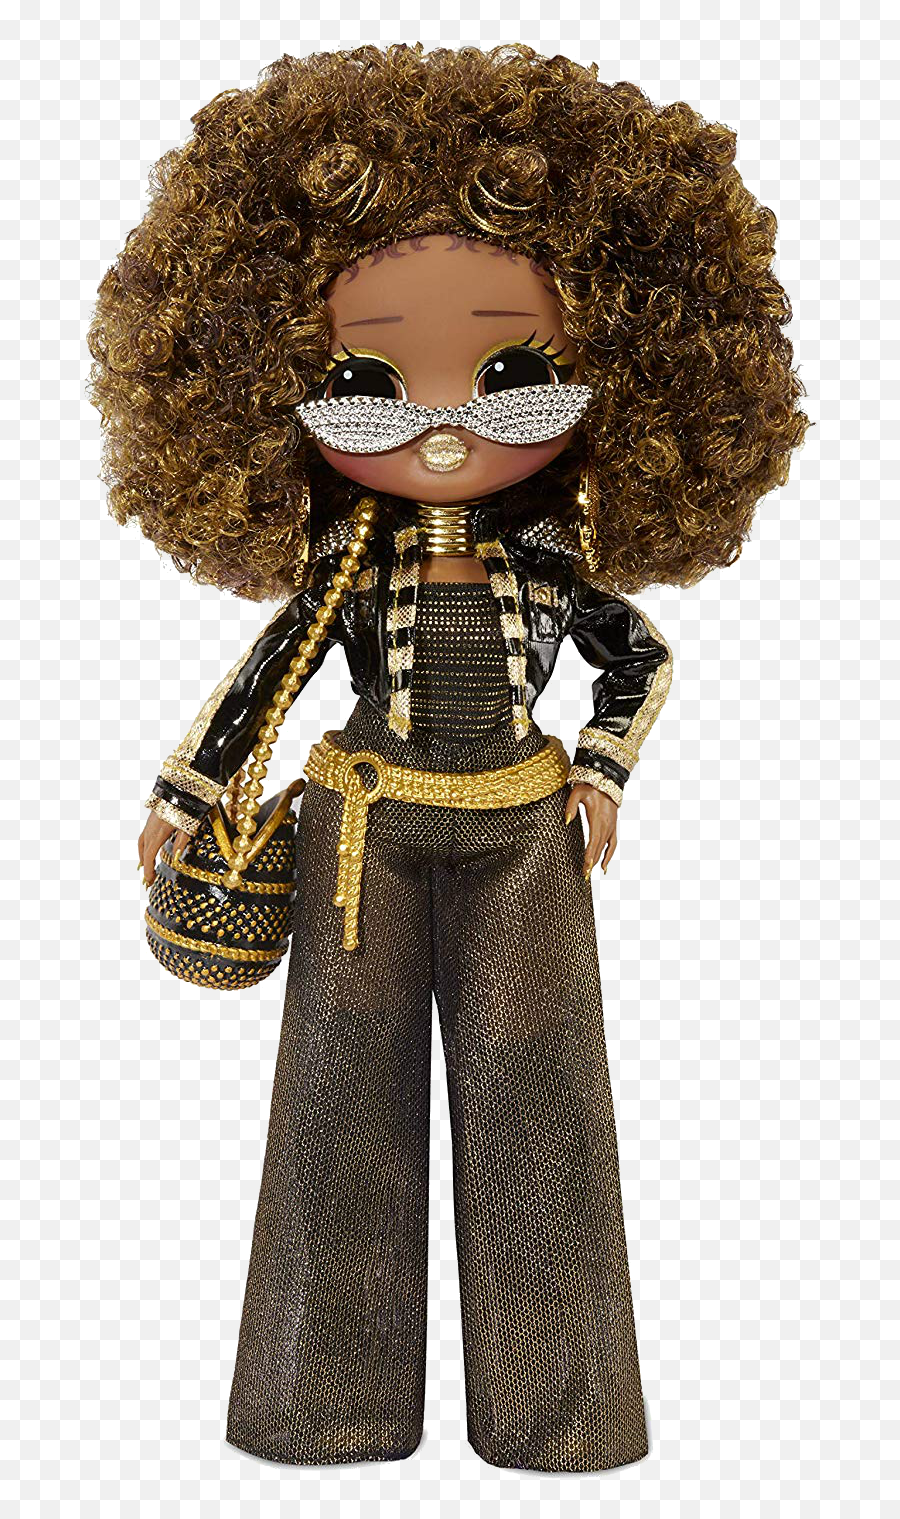 Lol Surprise Doll Png - Royal Bee Lol Omg,Doll Png